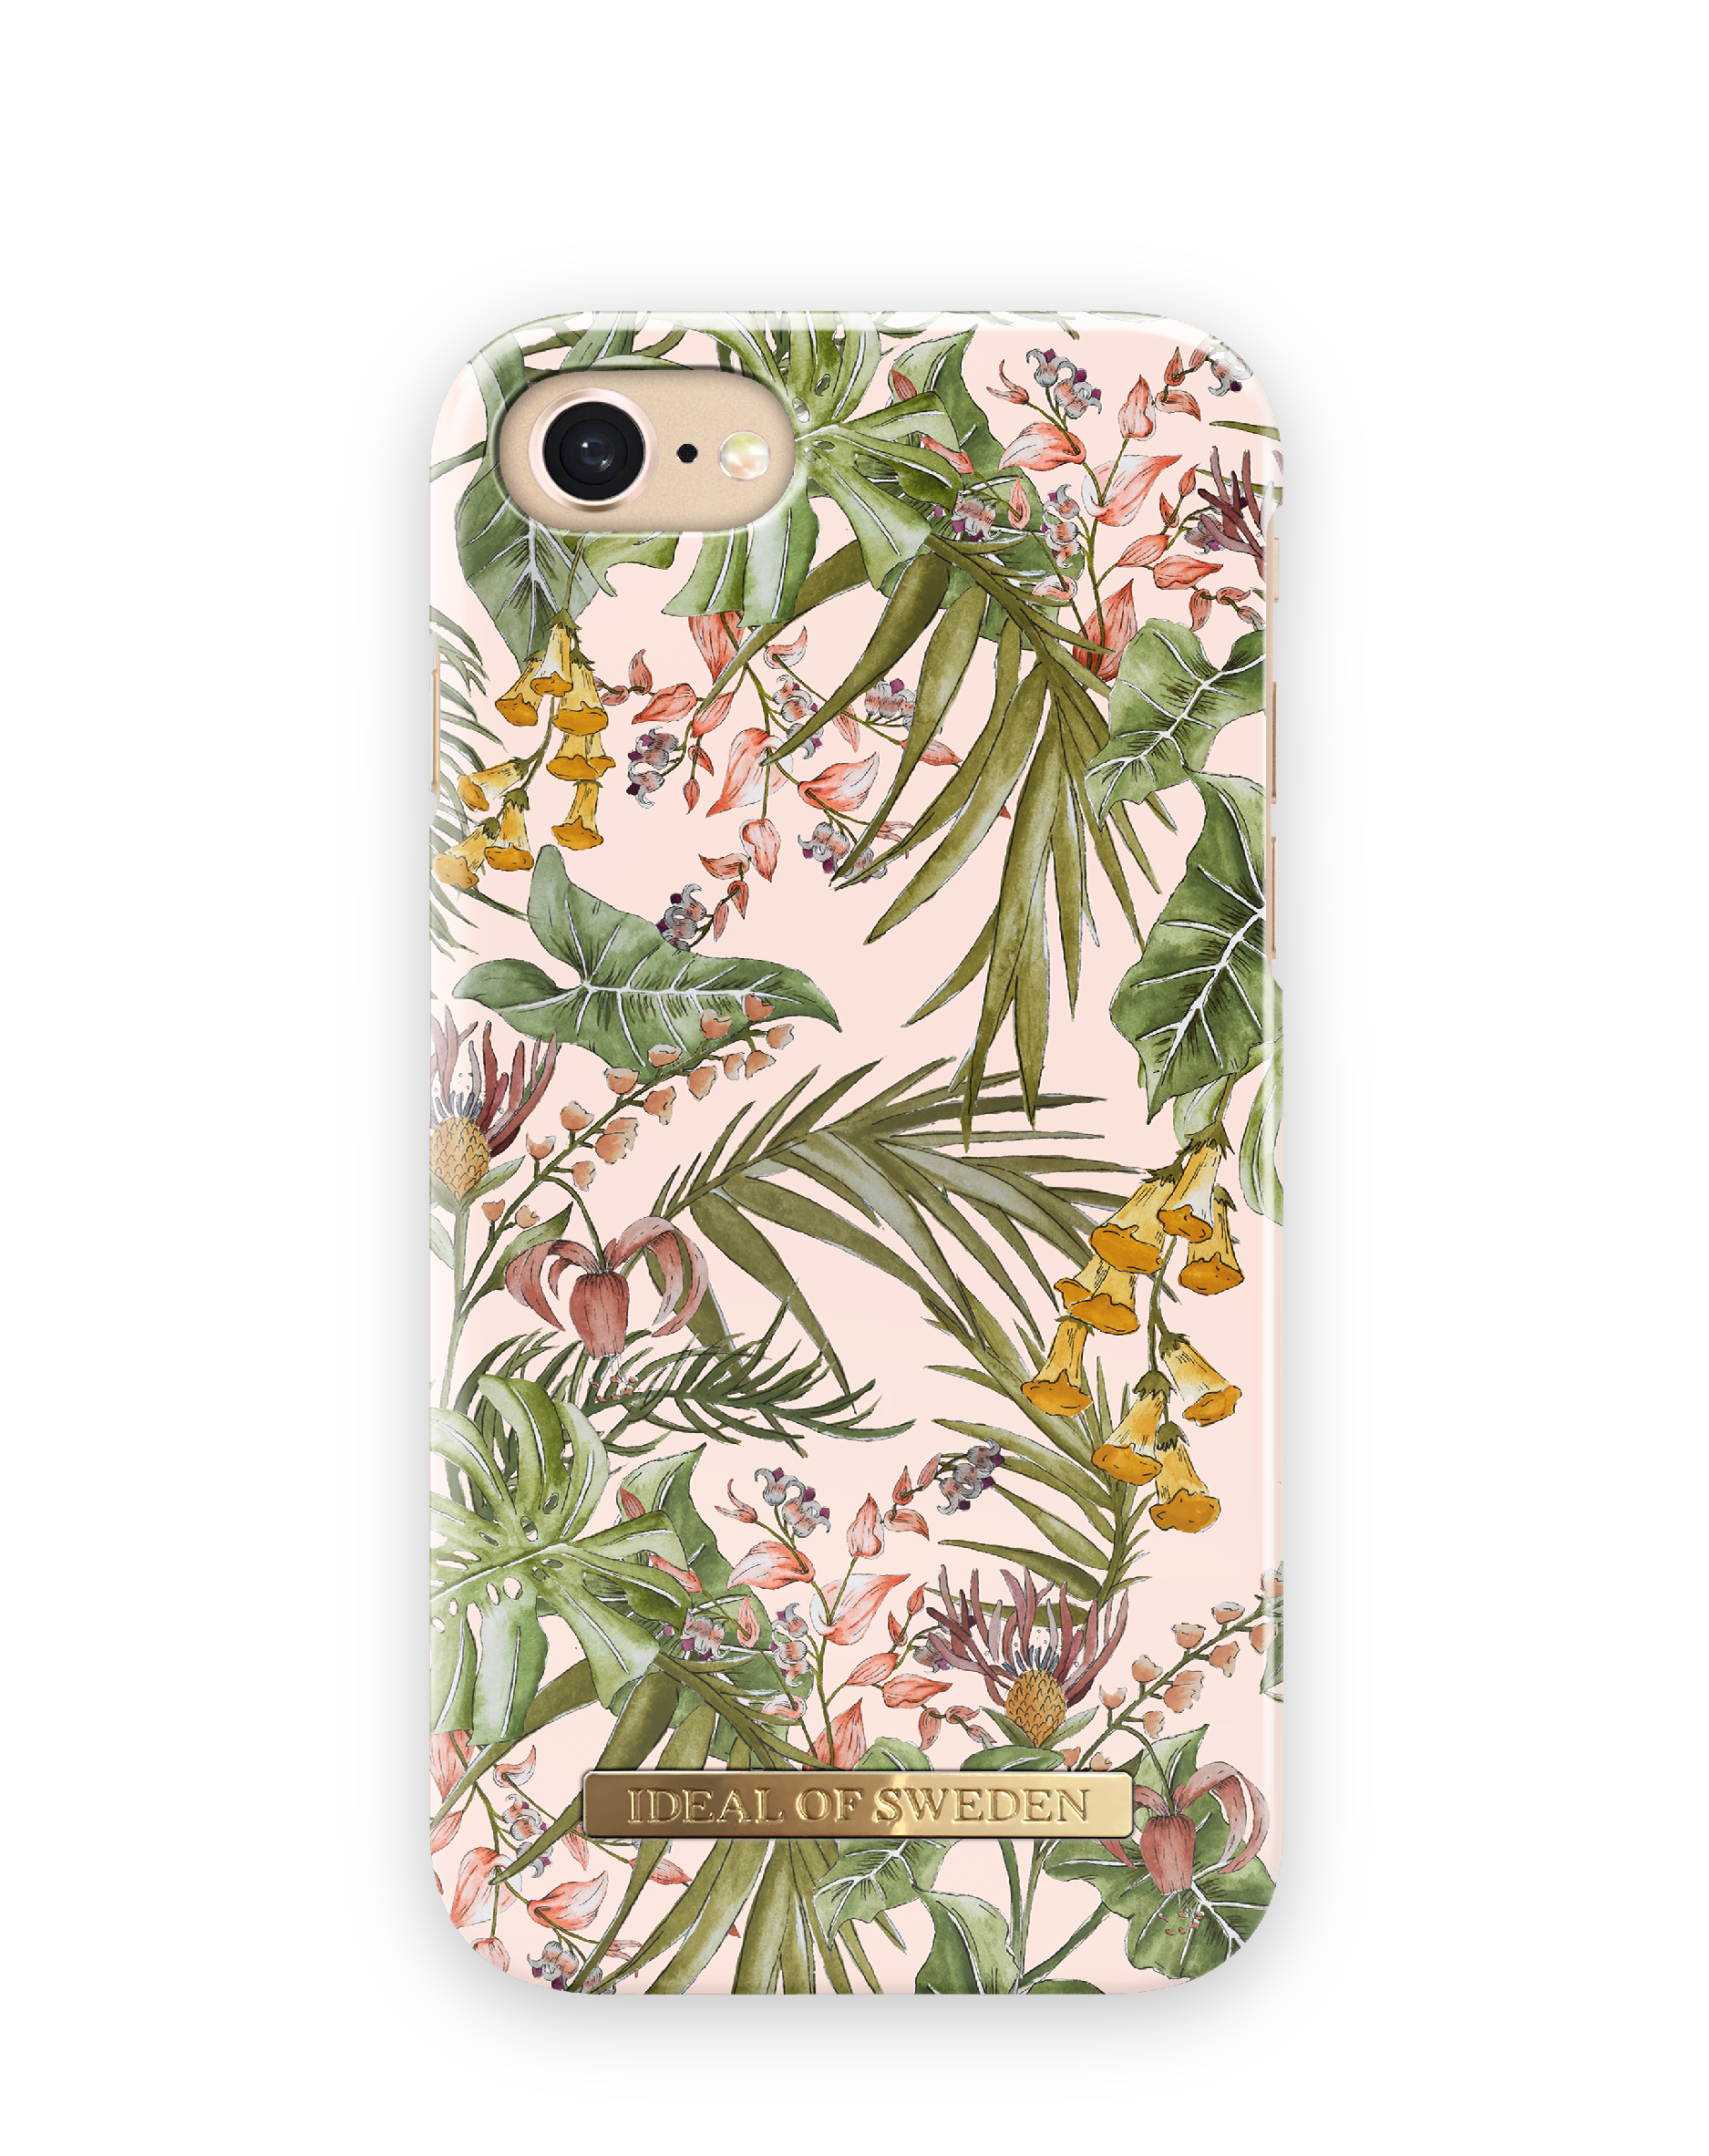 IDEAL OF SWEDEN Apple IDFCSS19-I7-114, iPhone 7, 6(S), Apple Apple iPhone Backcover, Apple, 8, Pastel (2020), Savanna iPhone SE iPhone Apple